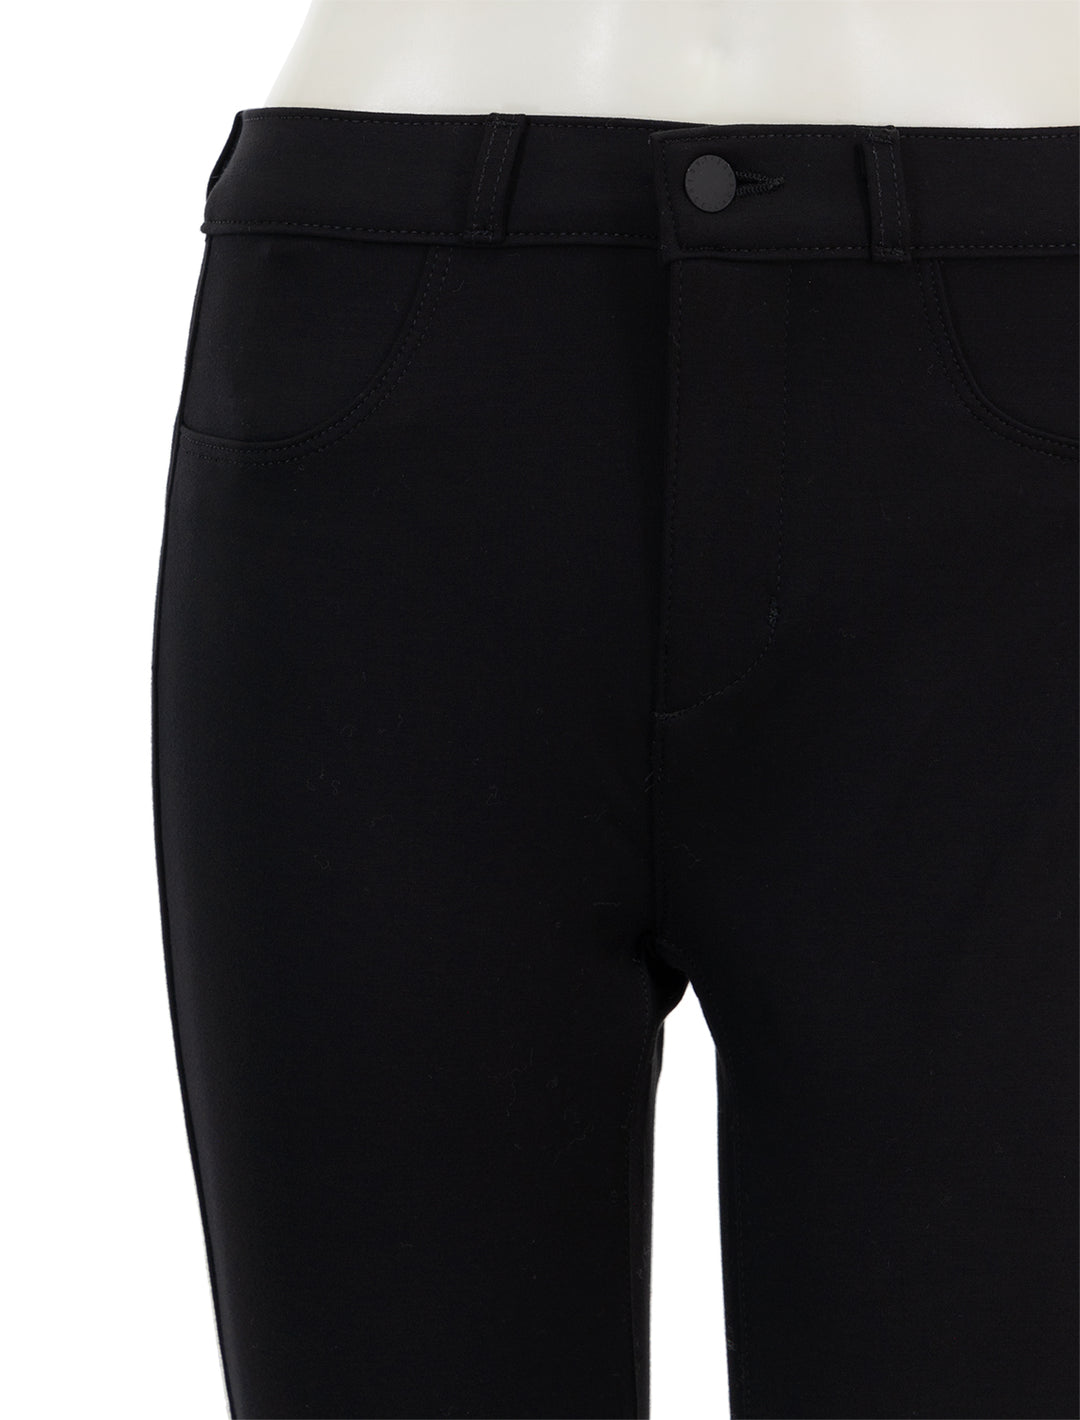 Close-up view of L'agence's asher high rise seamed skinny pant in black.